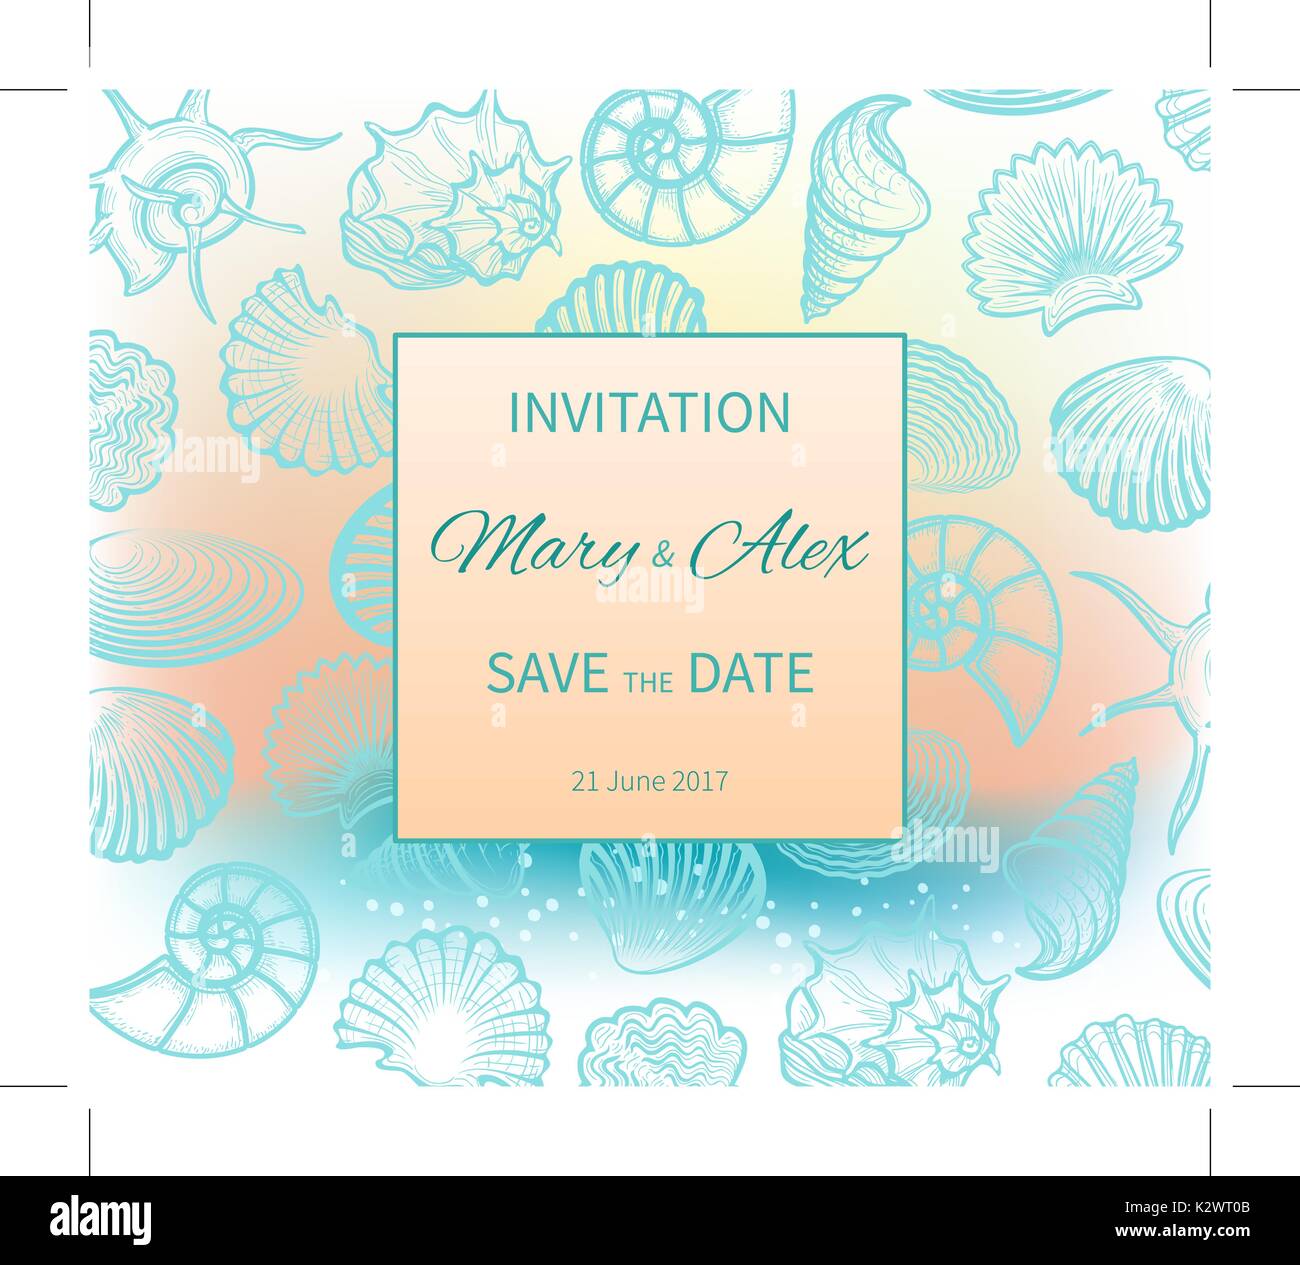 Wedding on the beach. The invitation design. Greeting card with sea shells. Vector illustration Stock Vector